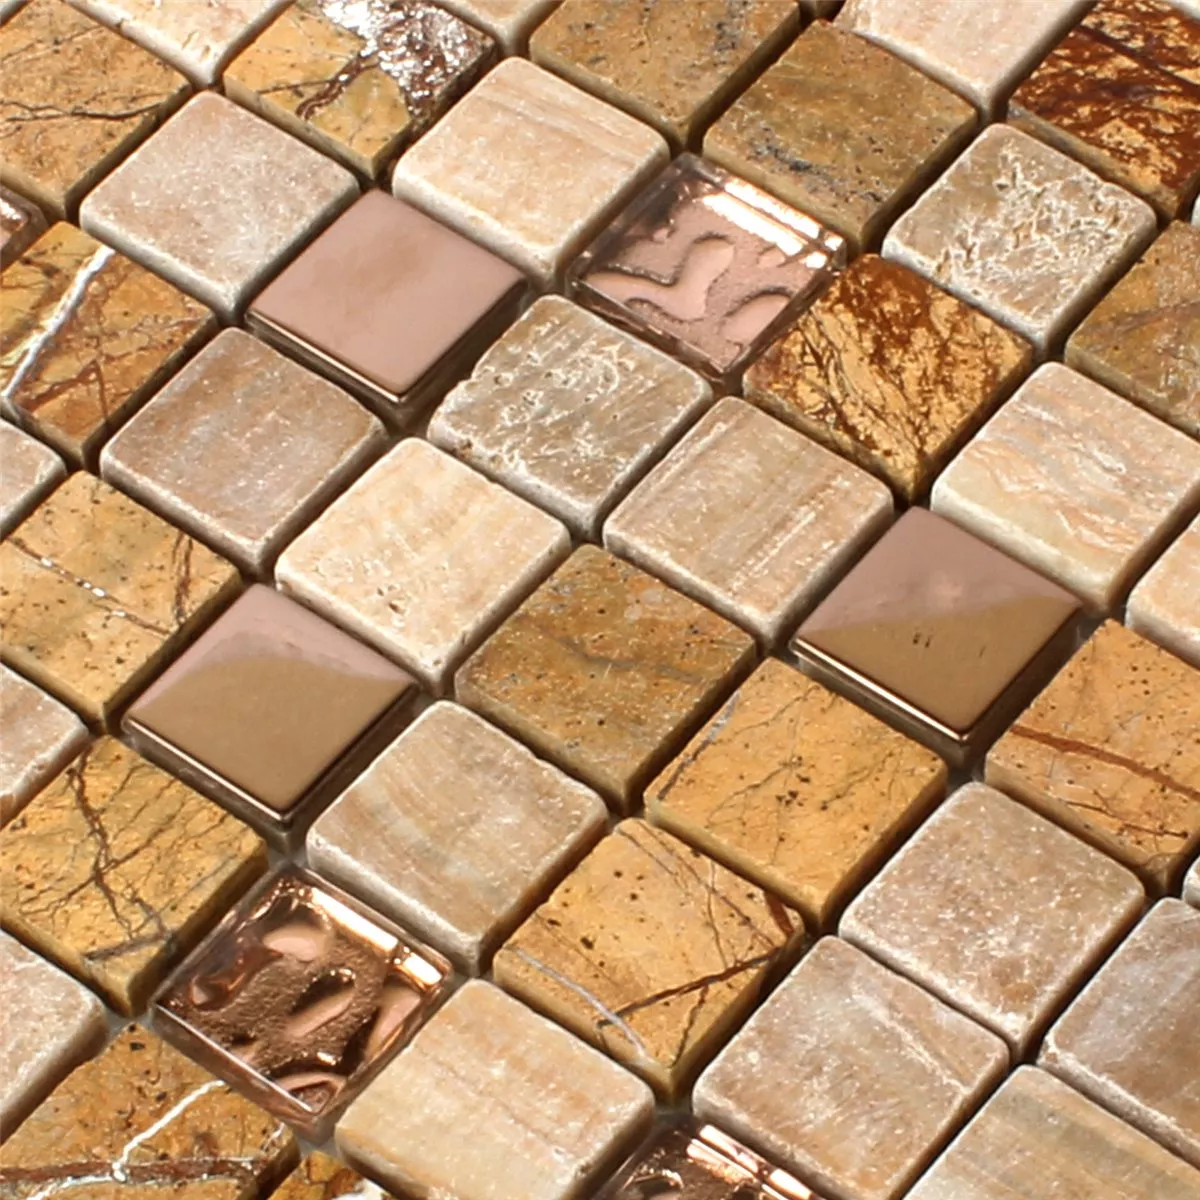 Sample Mosaic Tiles Glass Natural Stone Stainless Steel Brown Mix